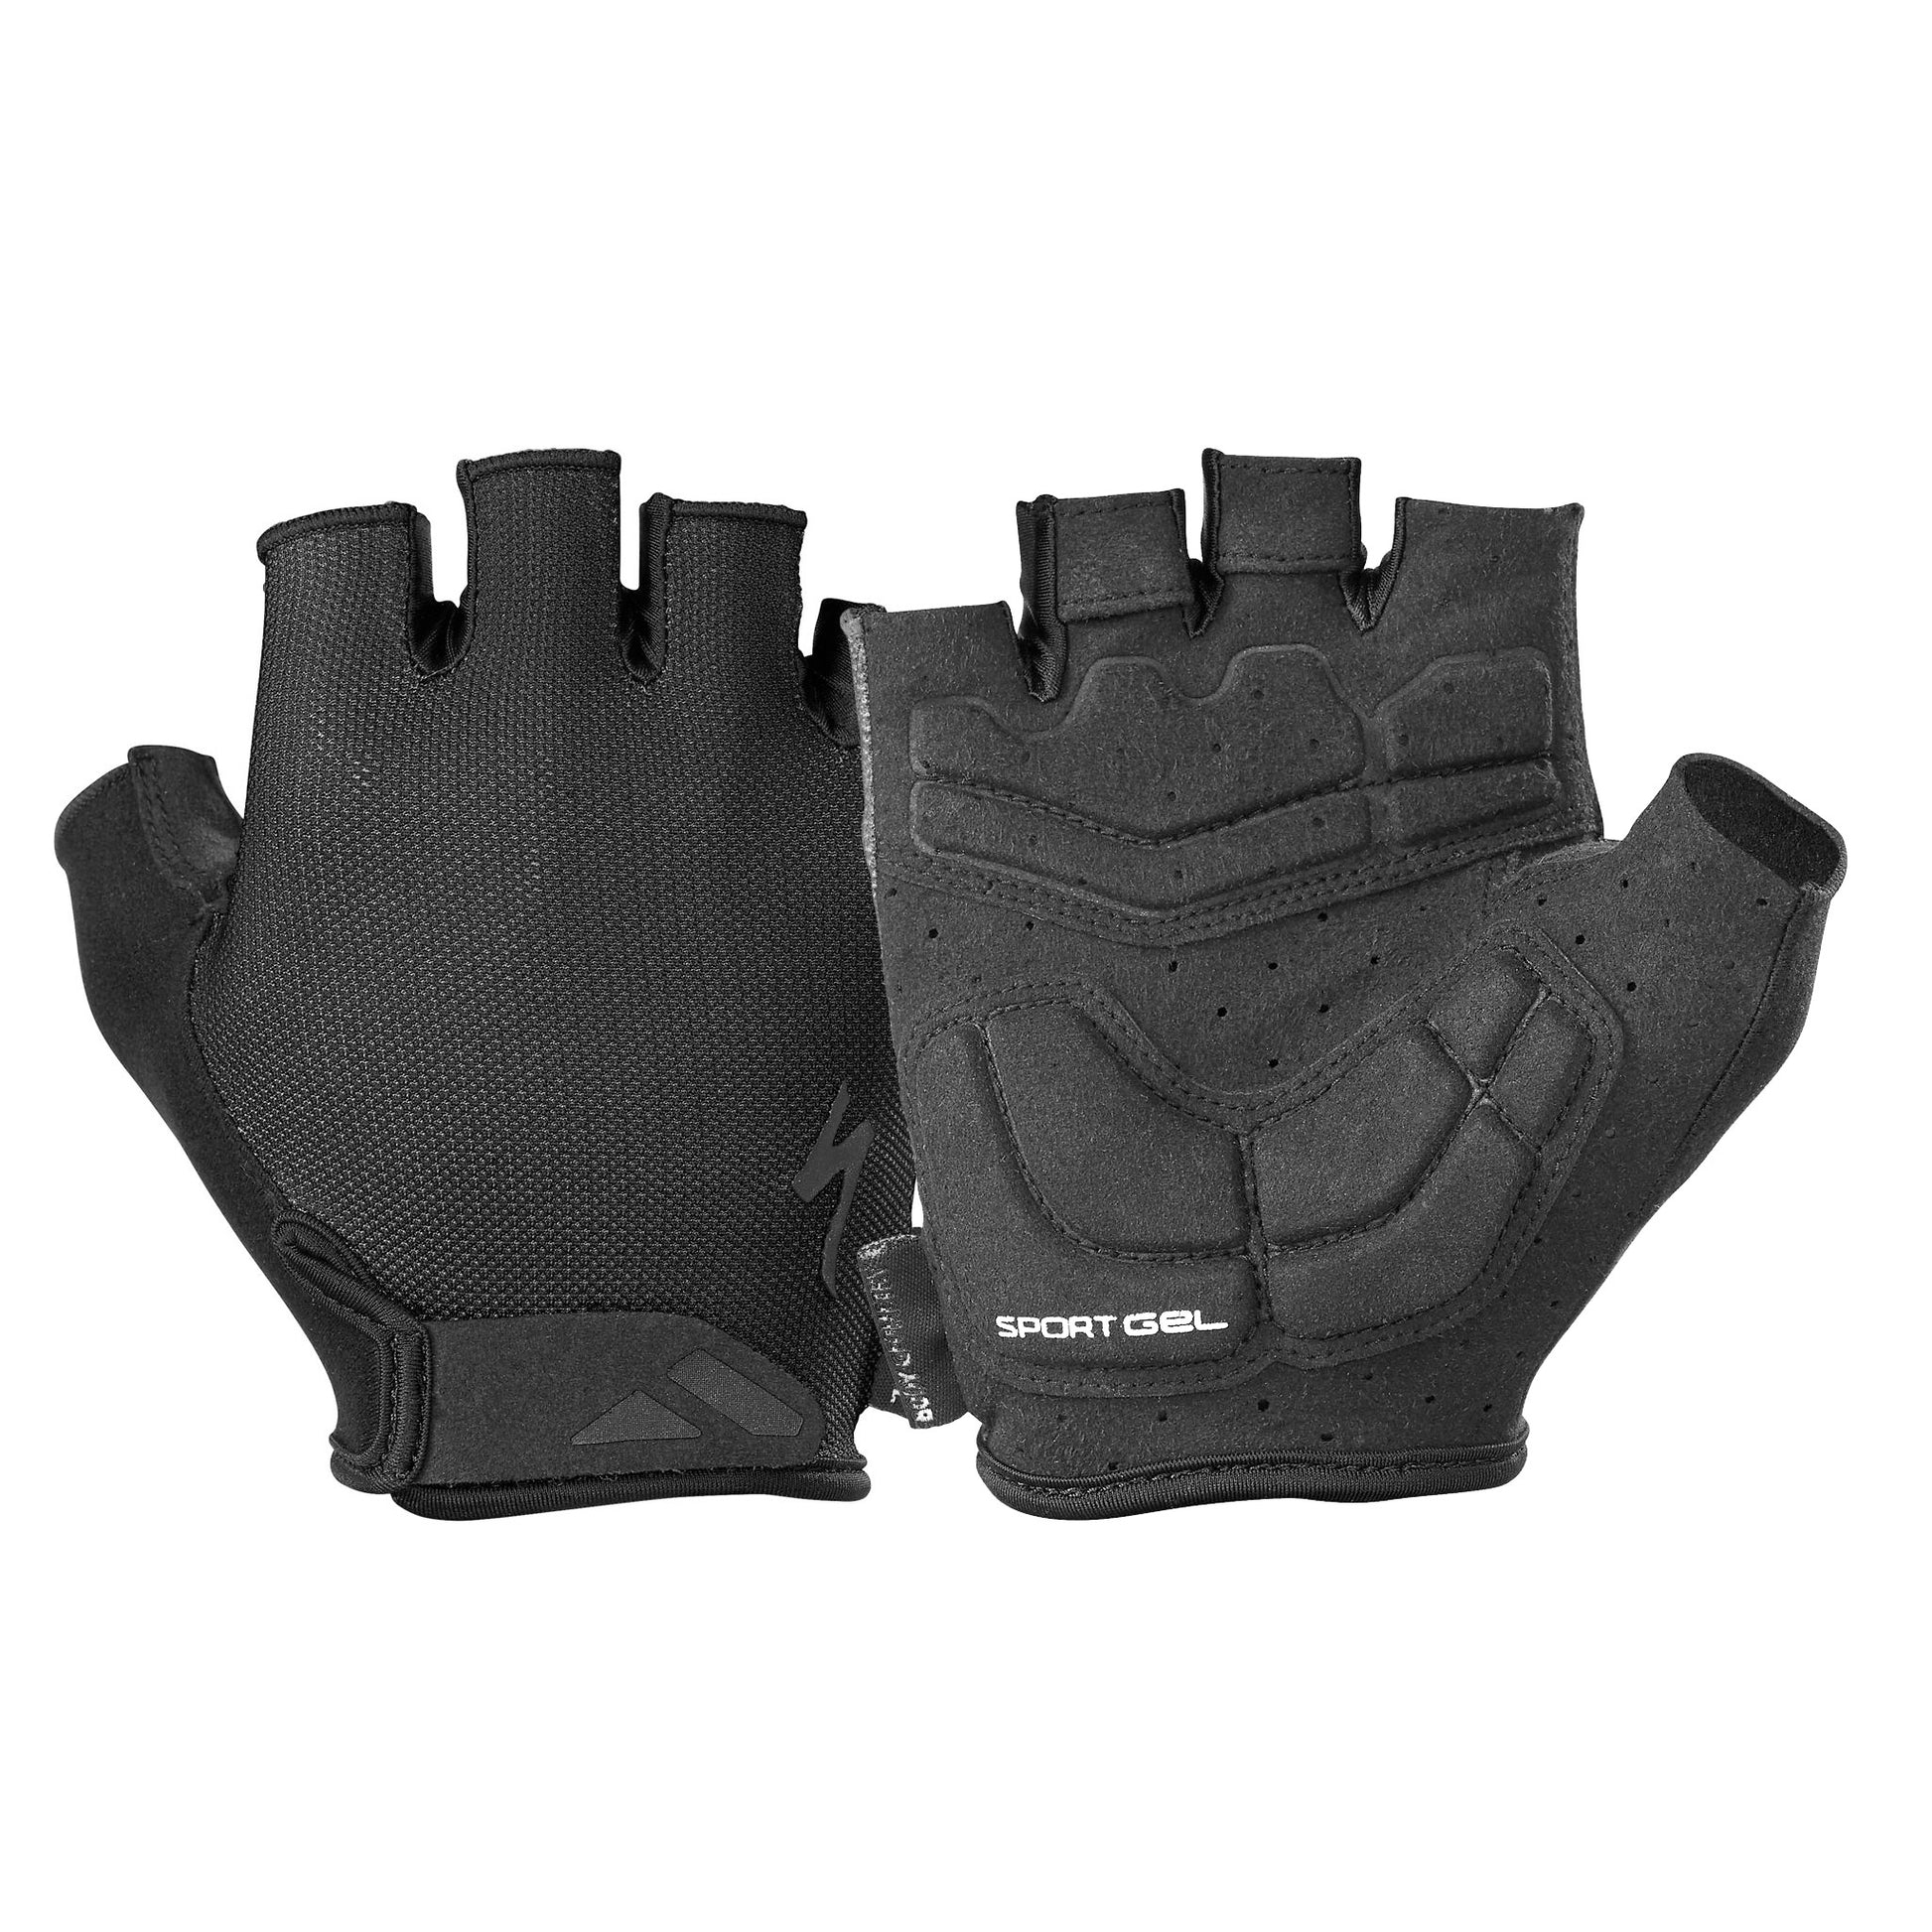 Specialized Mens Sport Gel Cycling Gloves buy online at Woolys Wheels